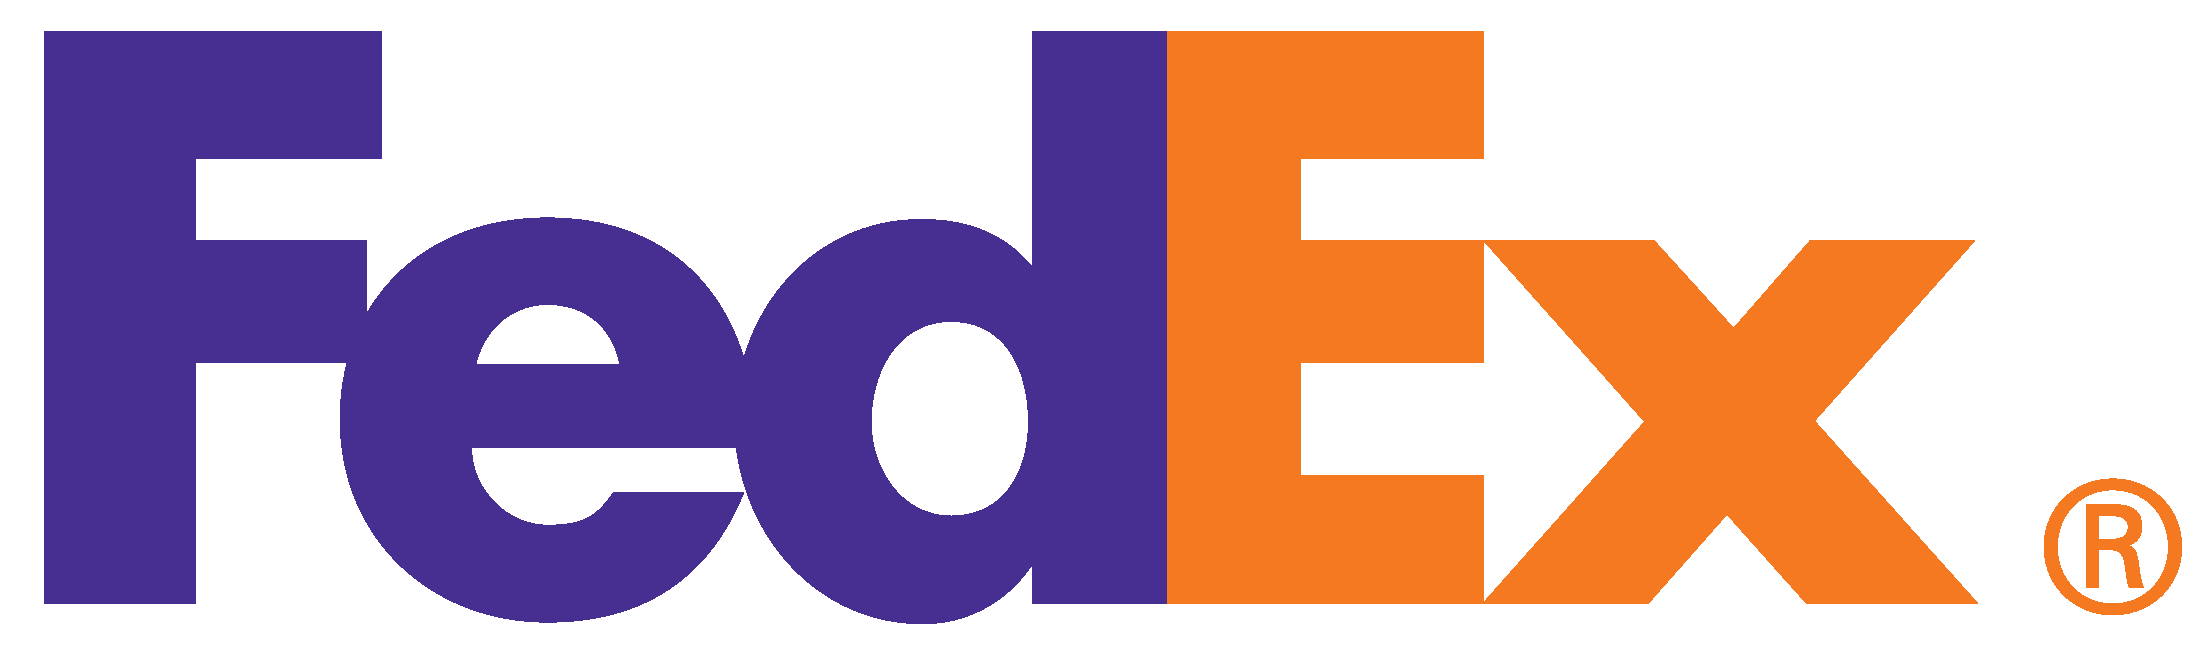 Fedex.png - Fedex Office, Transparent background PNG HD thumbnail